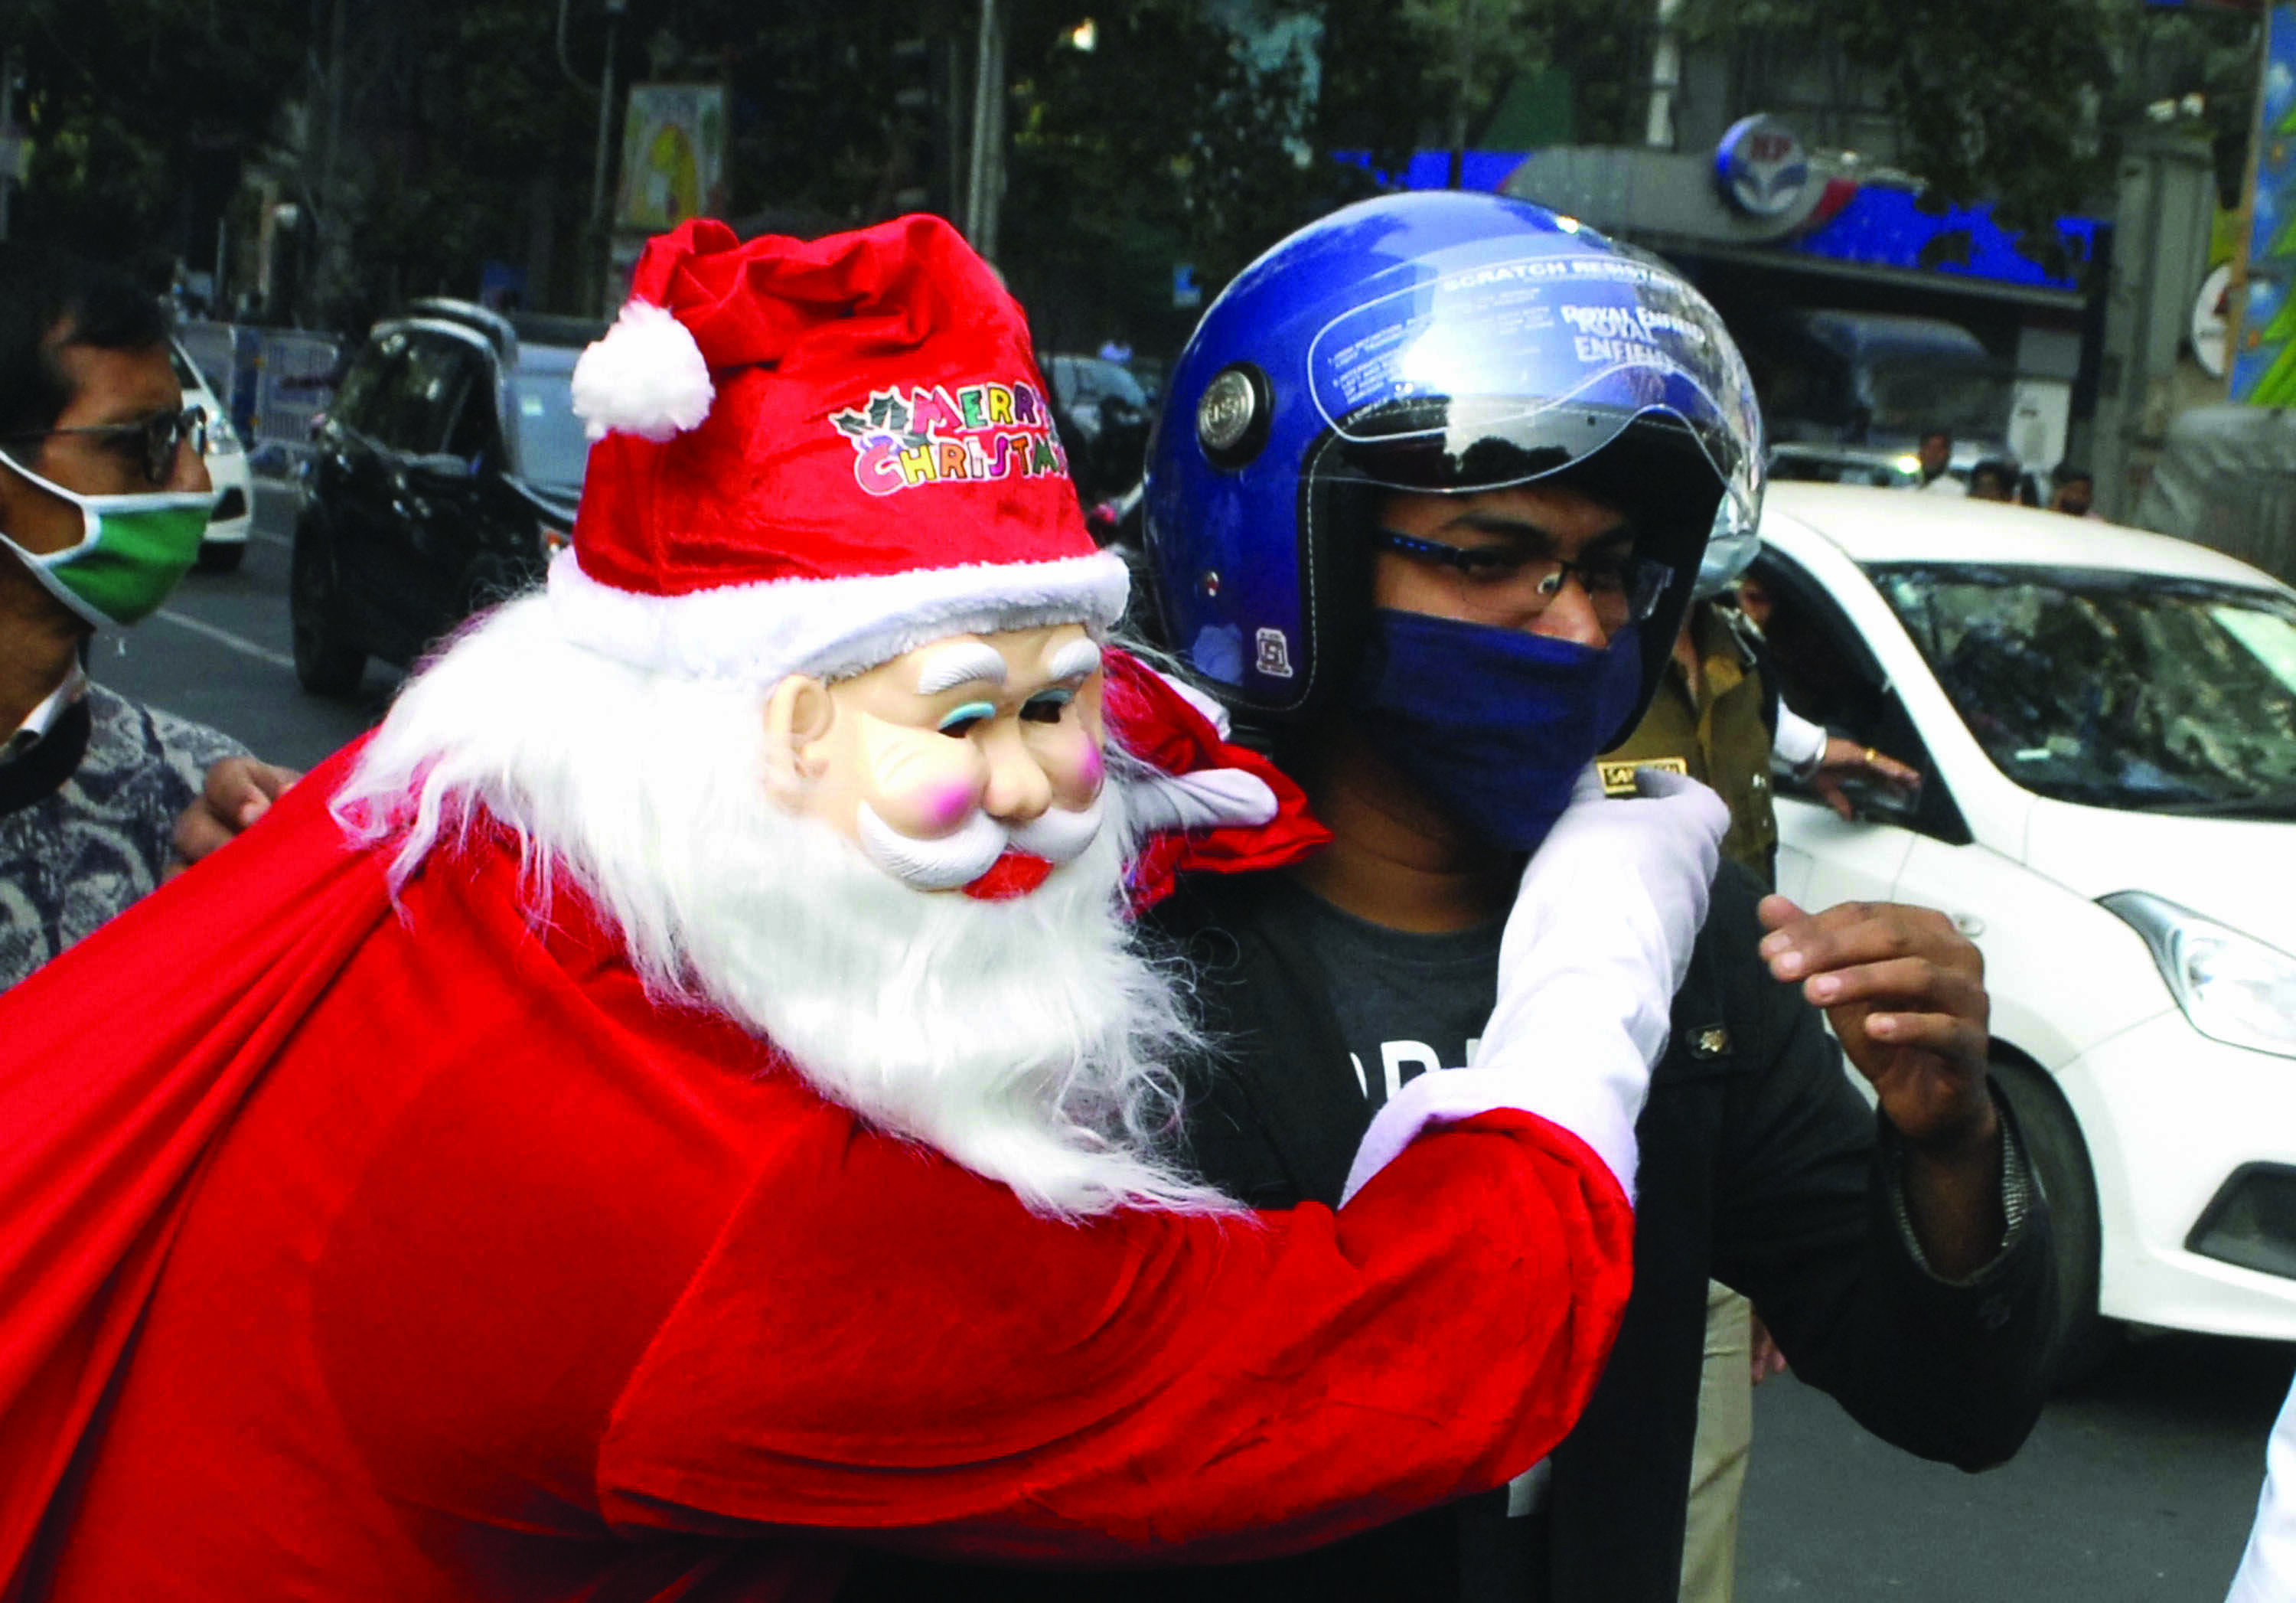 Festive season: Cops intensify naka checking to prevent accidents